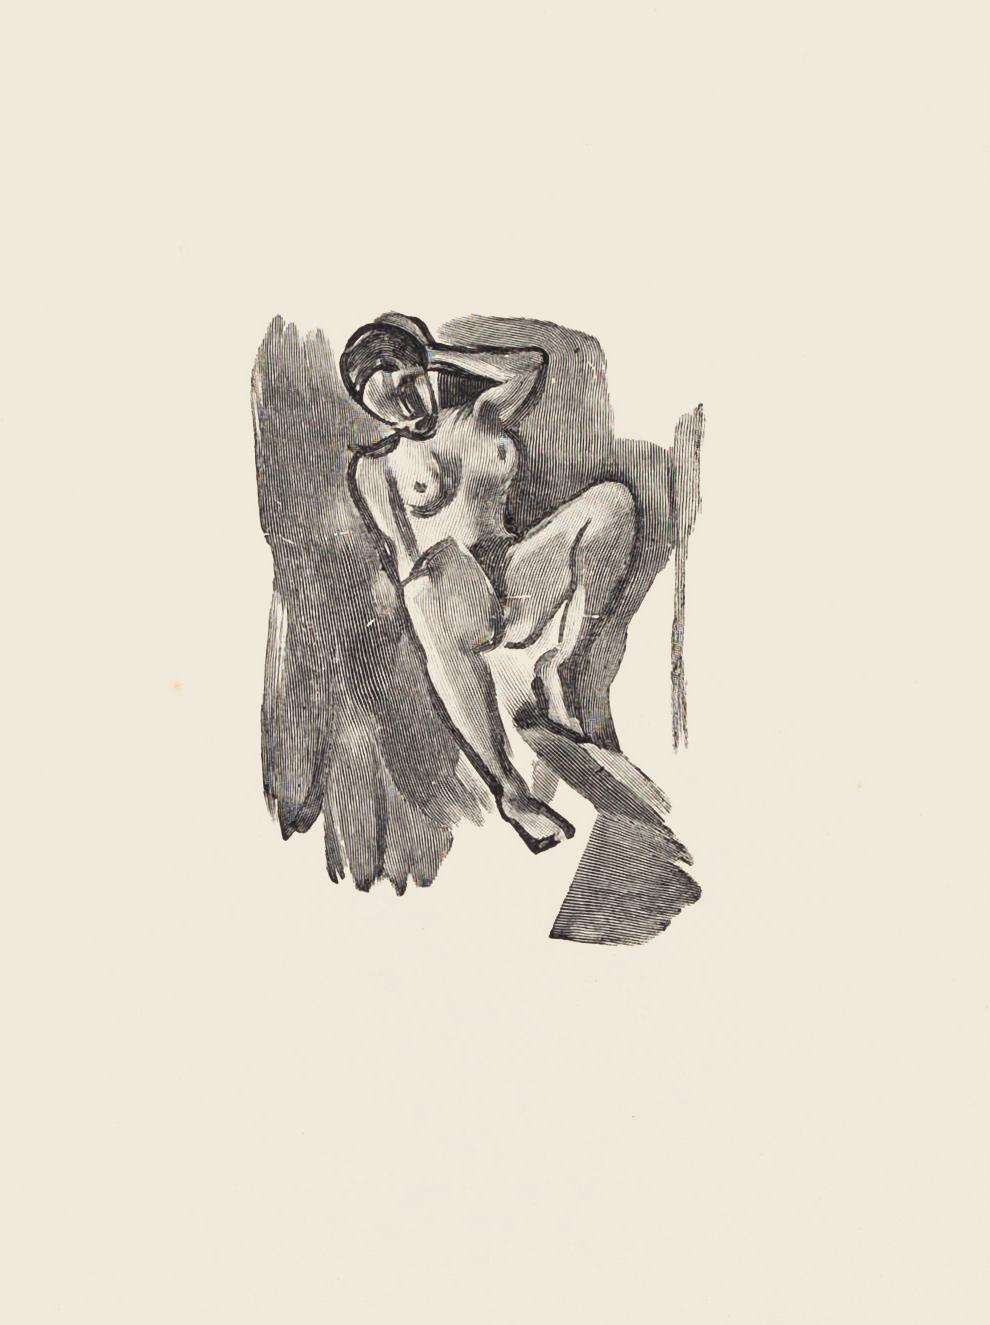 Nude is an original zincography artwork realized by Mino Maccari.

Included a white Passepartout: 49 x 34

The state of preservation is very good.




The artwork represents a nude seated woman, characterized by strong and confident strokes.

Mino